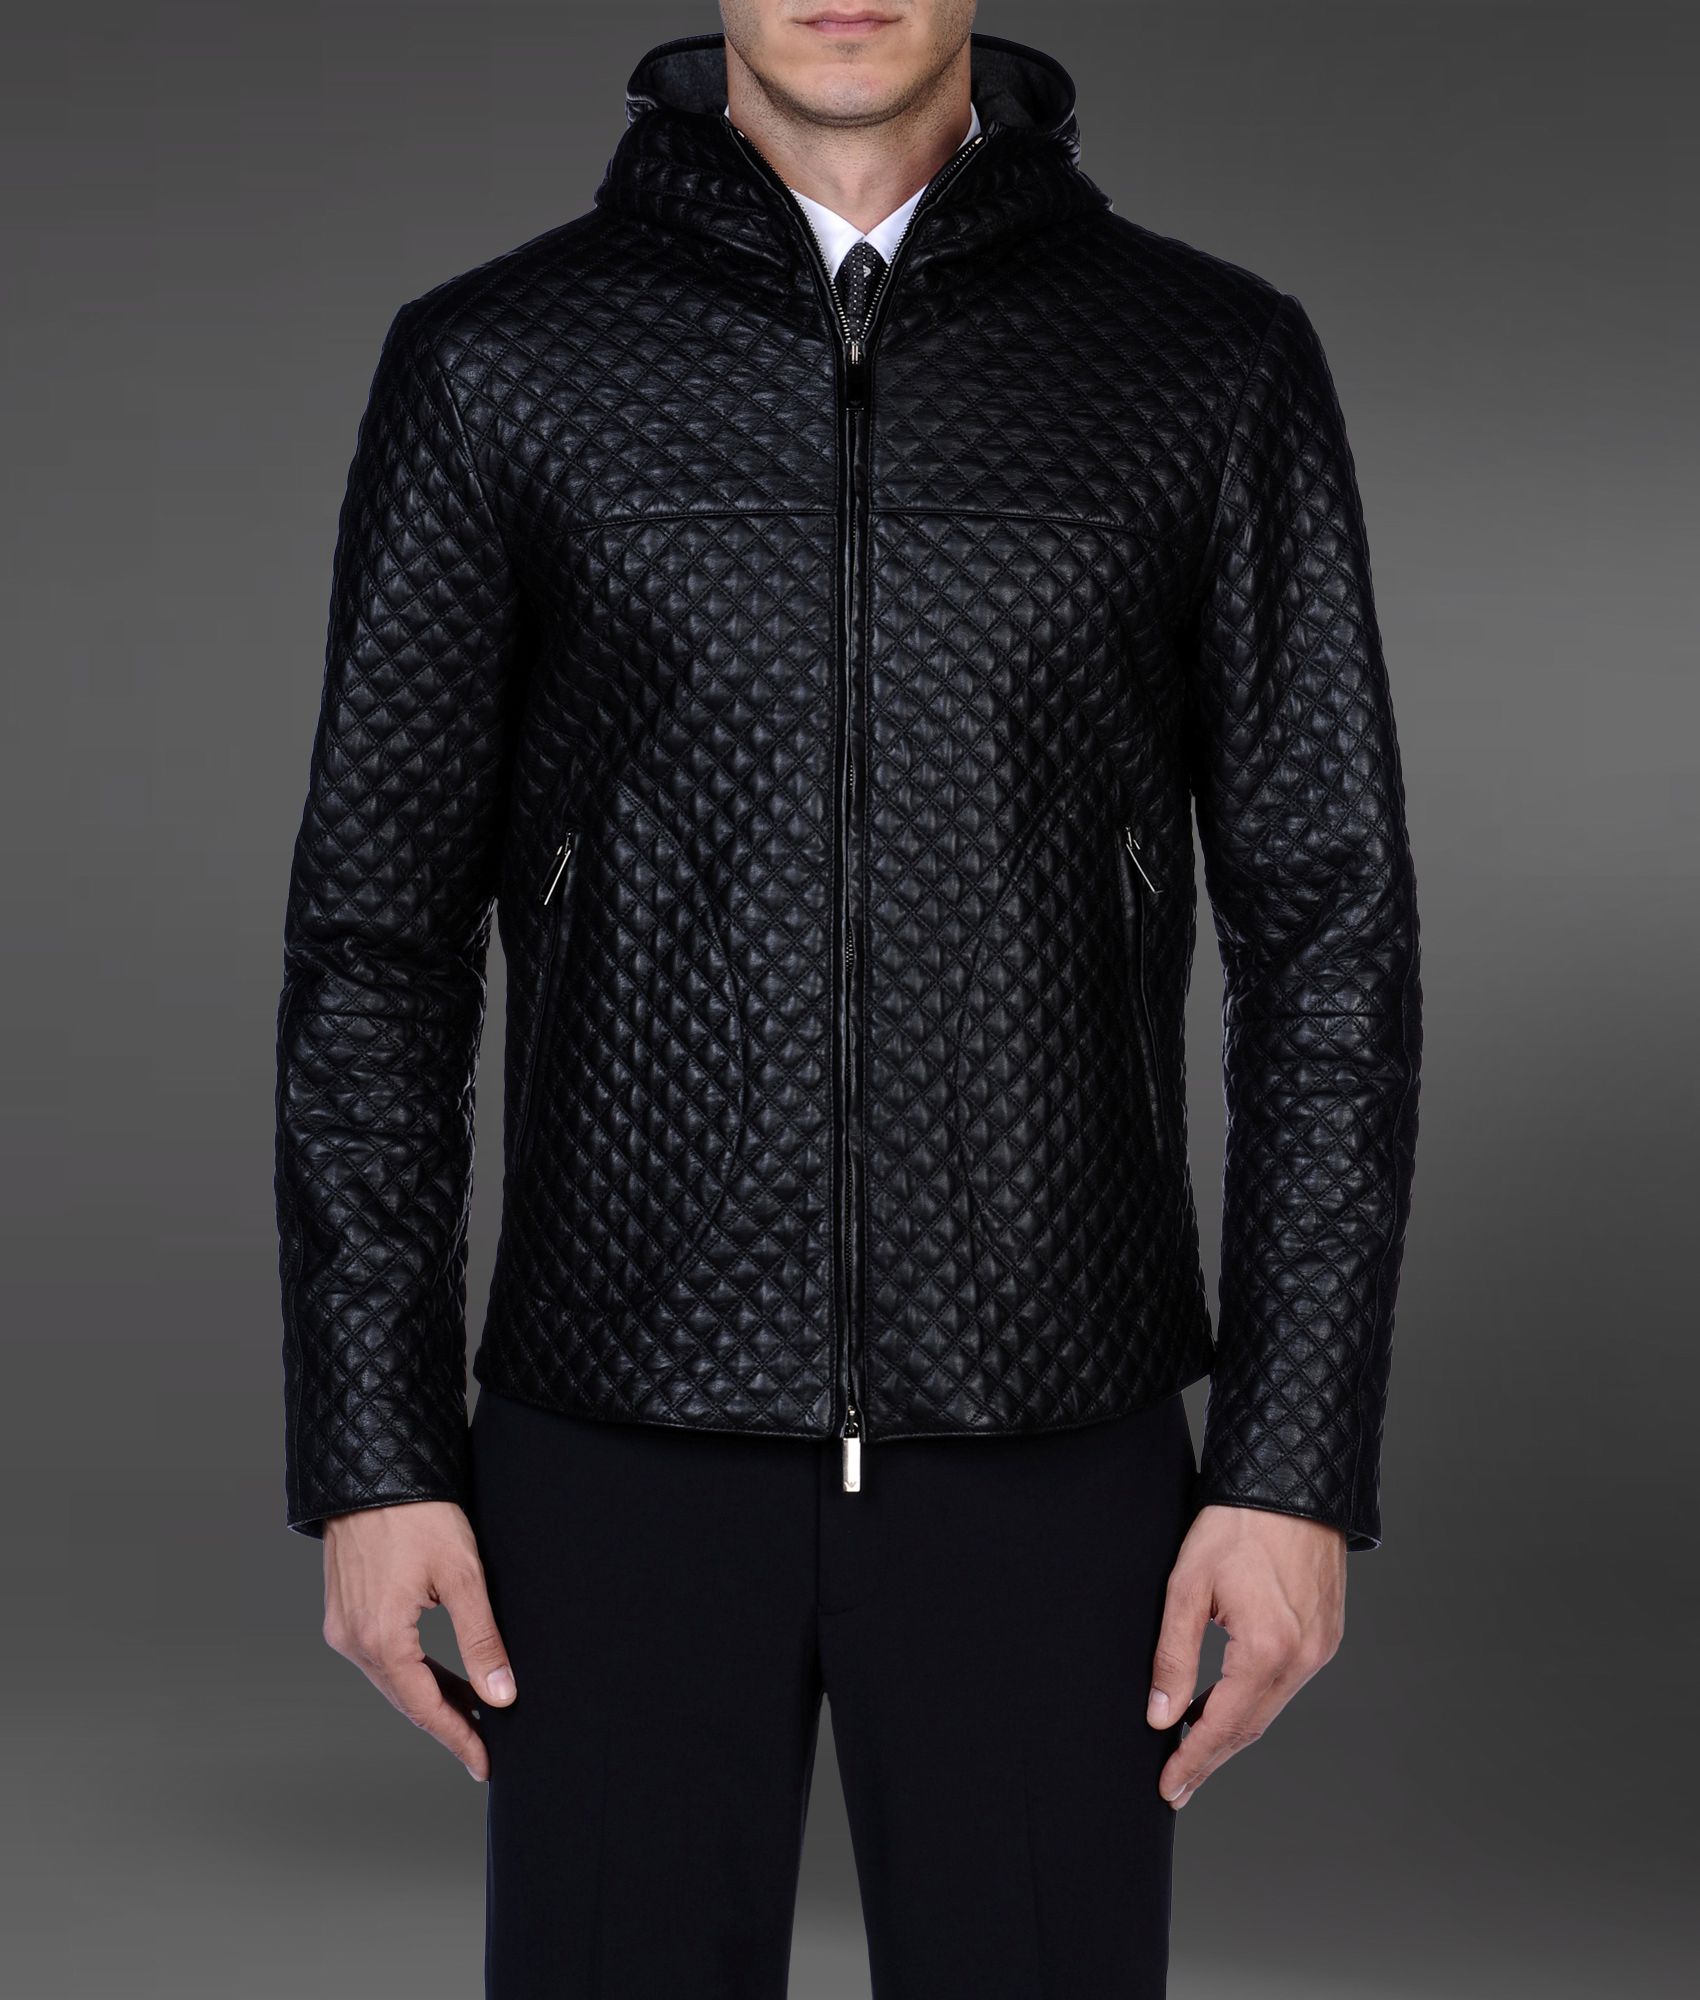 Lyst - Emporio Armani Leather Jacket in Black for Men